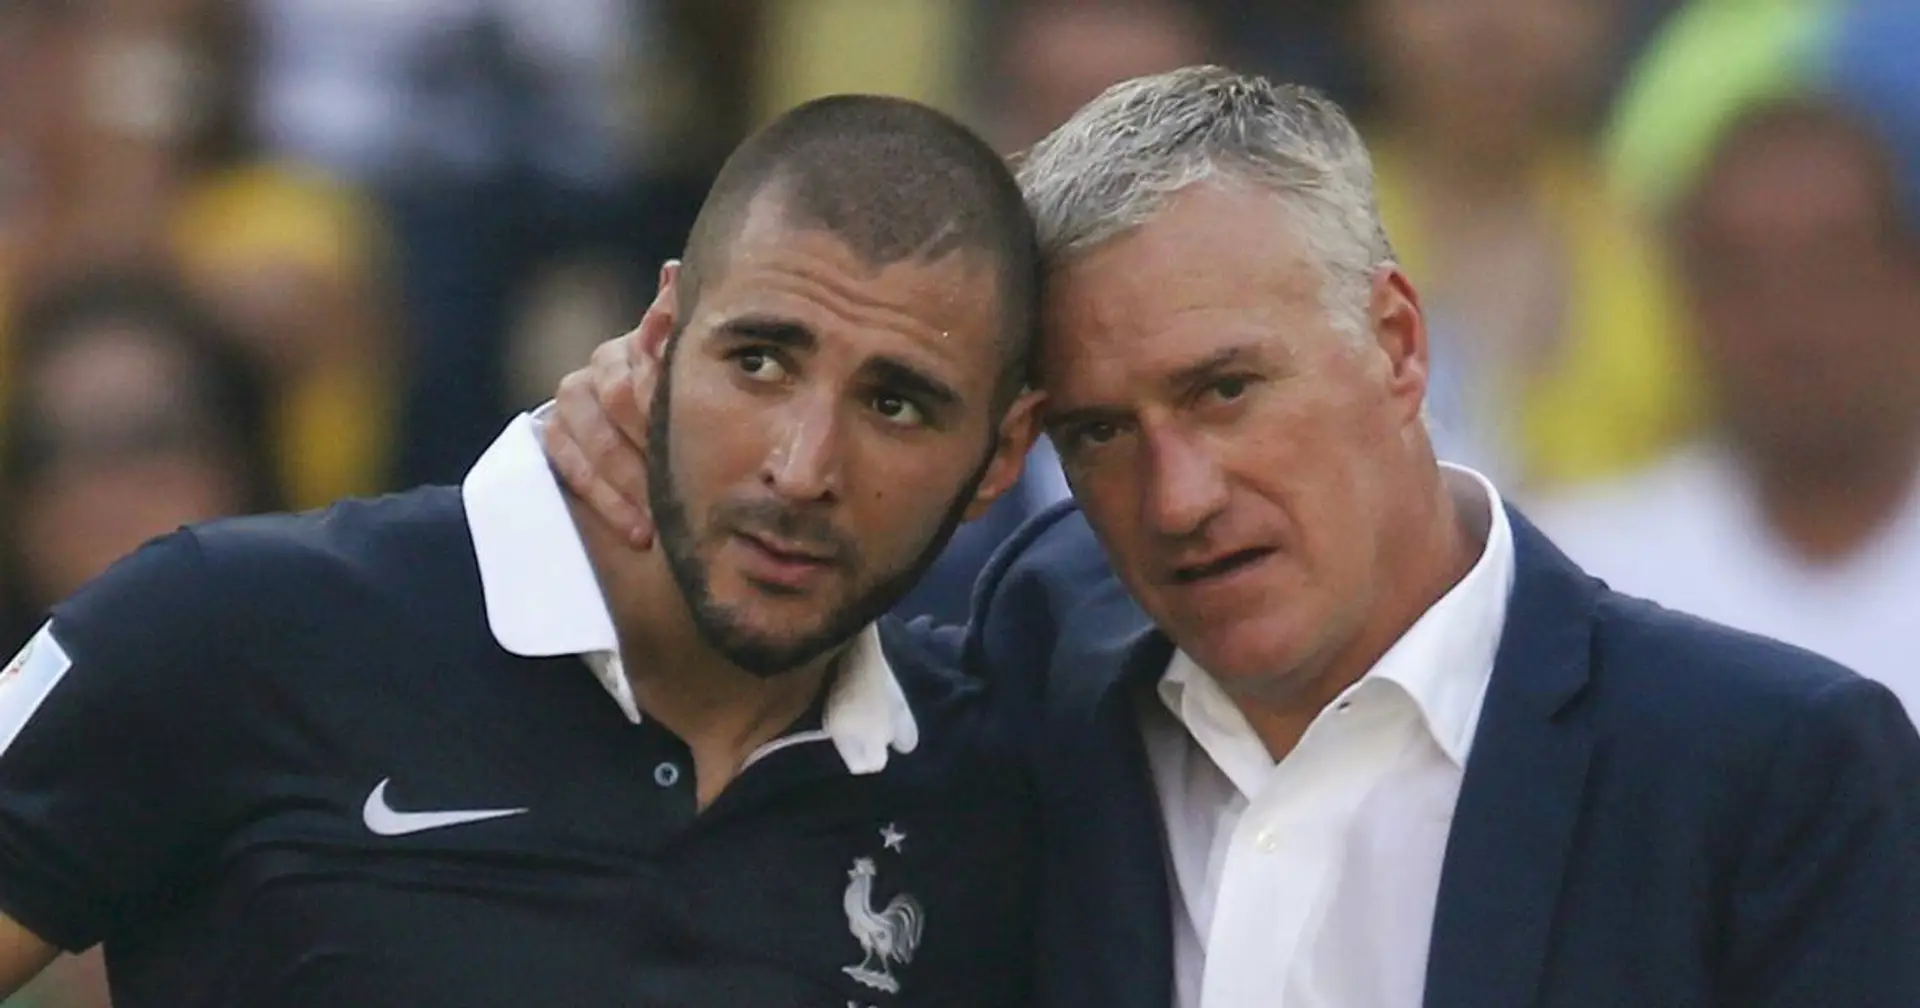 'I'll never forget what he said': France coach Deschamps closes door for Benzema after his racism accusations